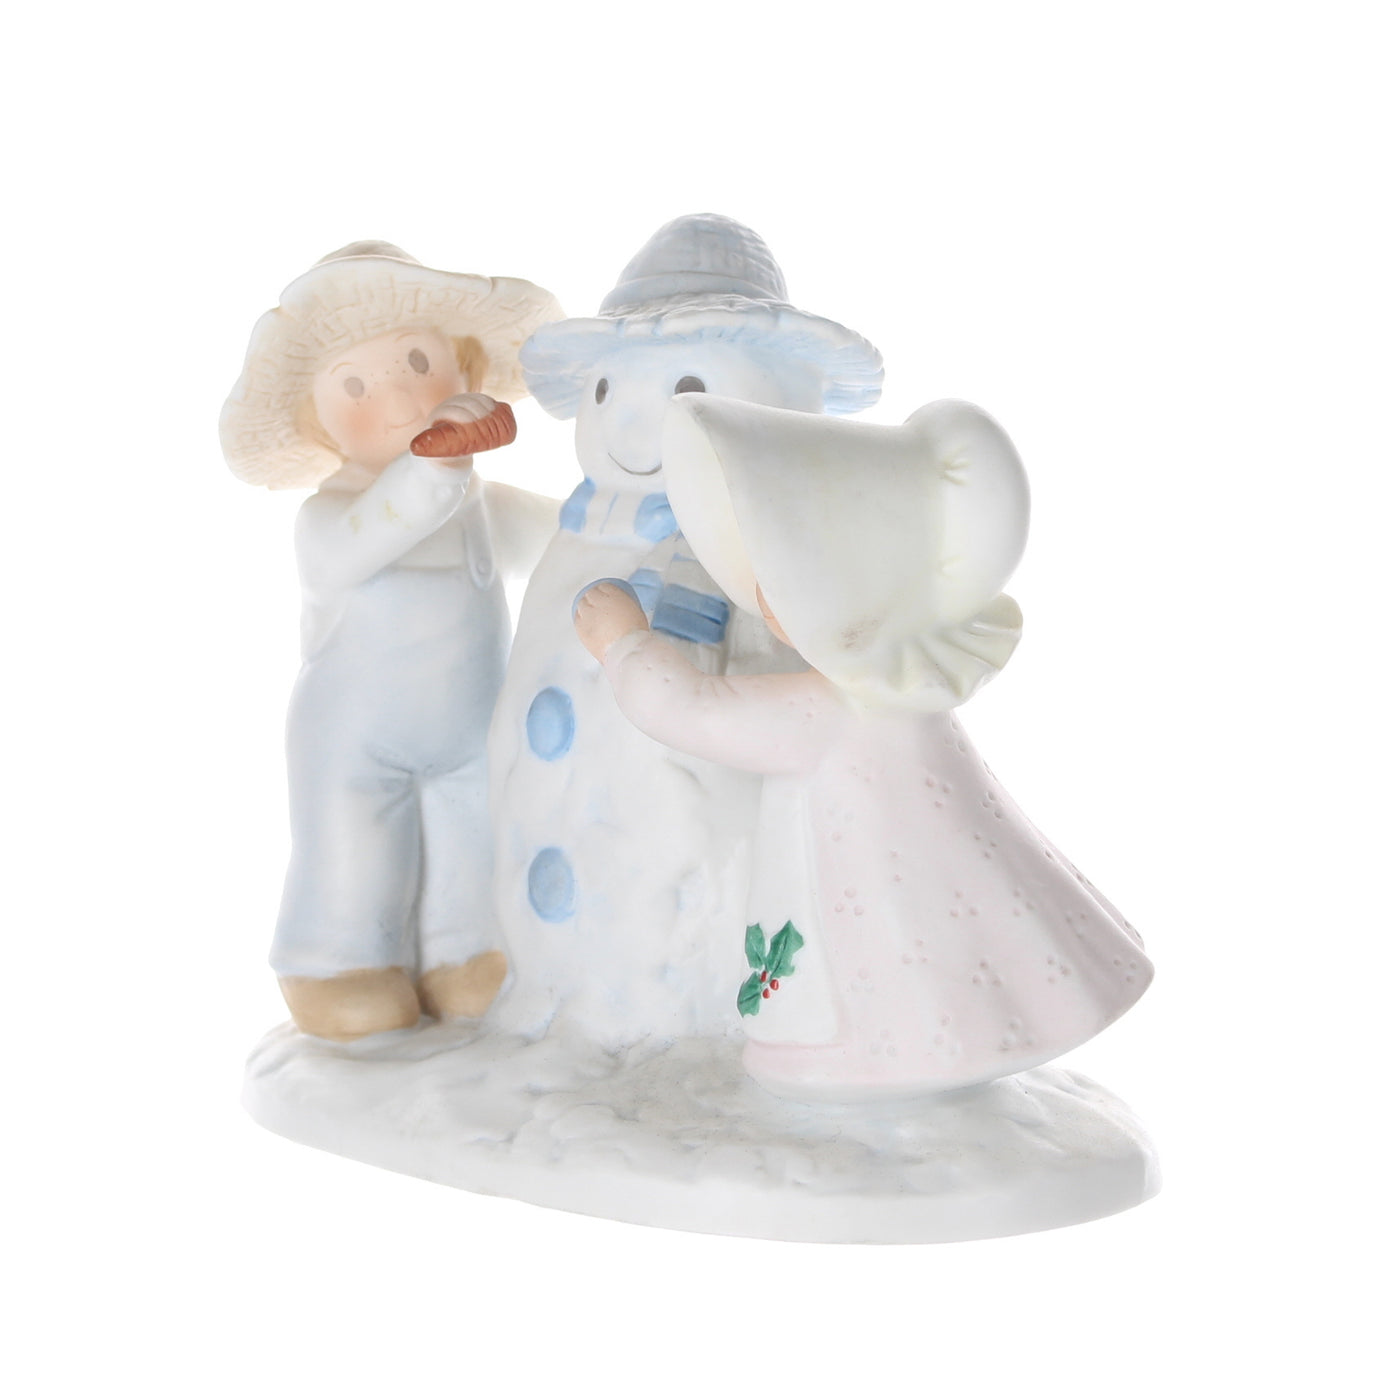 Homco-Circle-of-Friends-Porcelain-Figurine-Snow-Play-picture-2